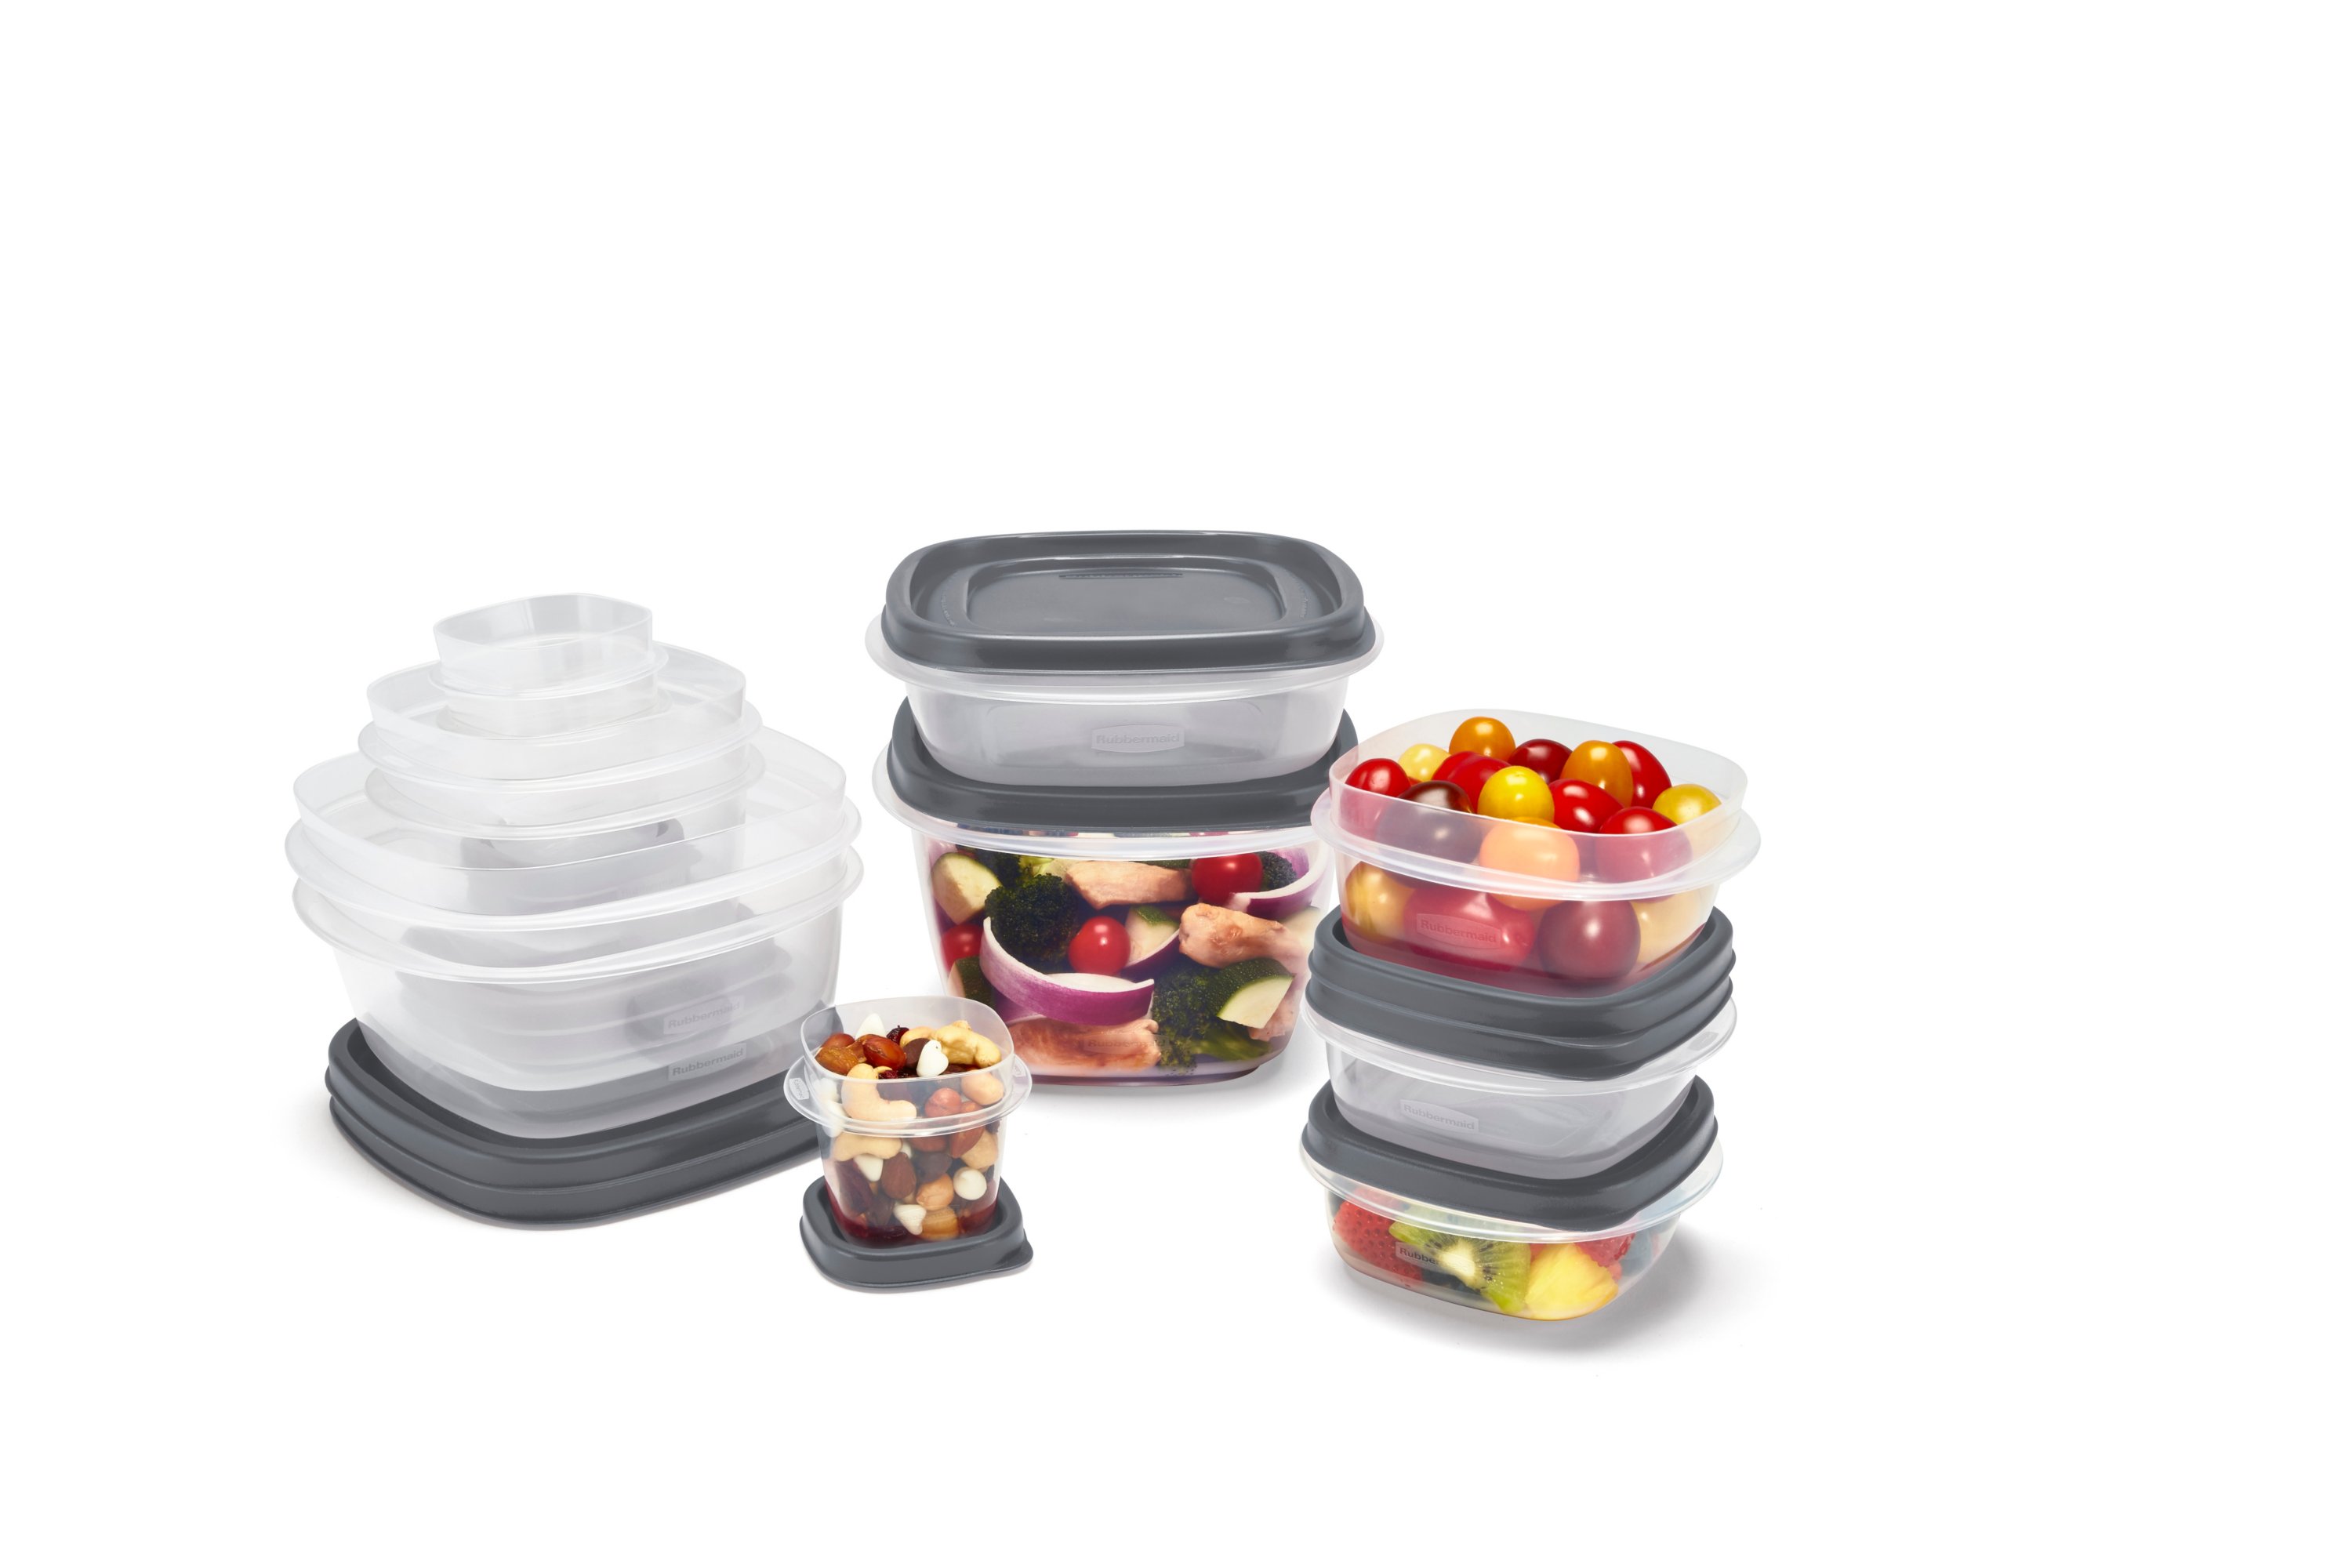 Rubbermaid Servin' Saver Storage Containers - household items - by